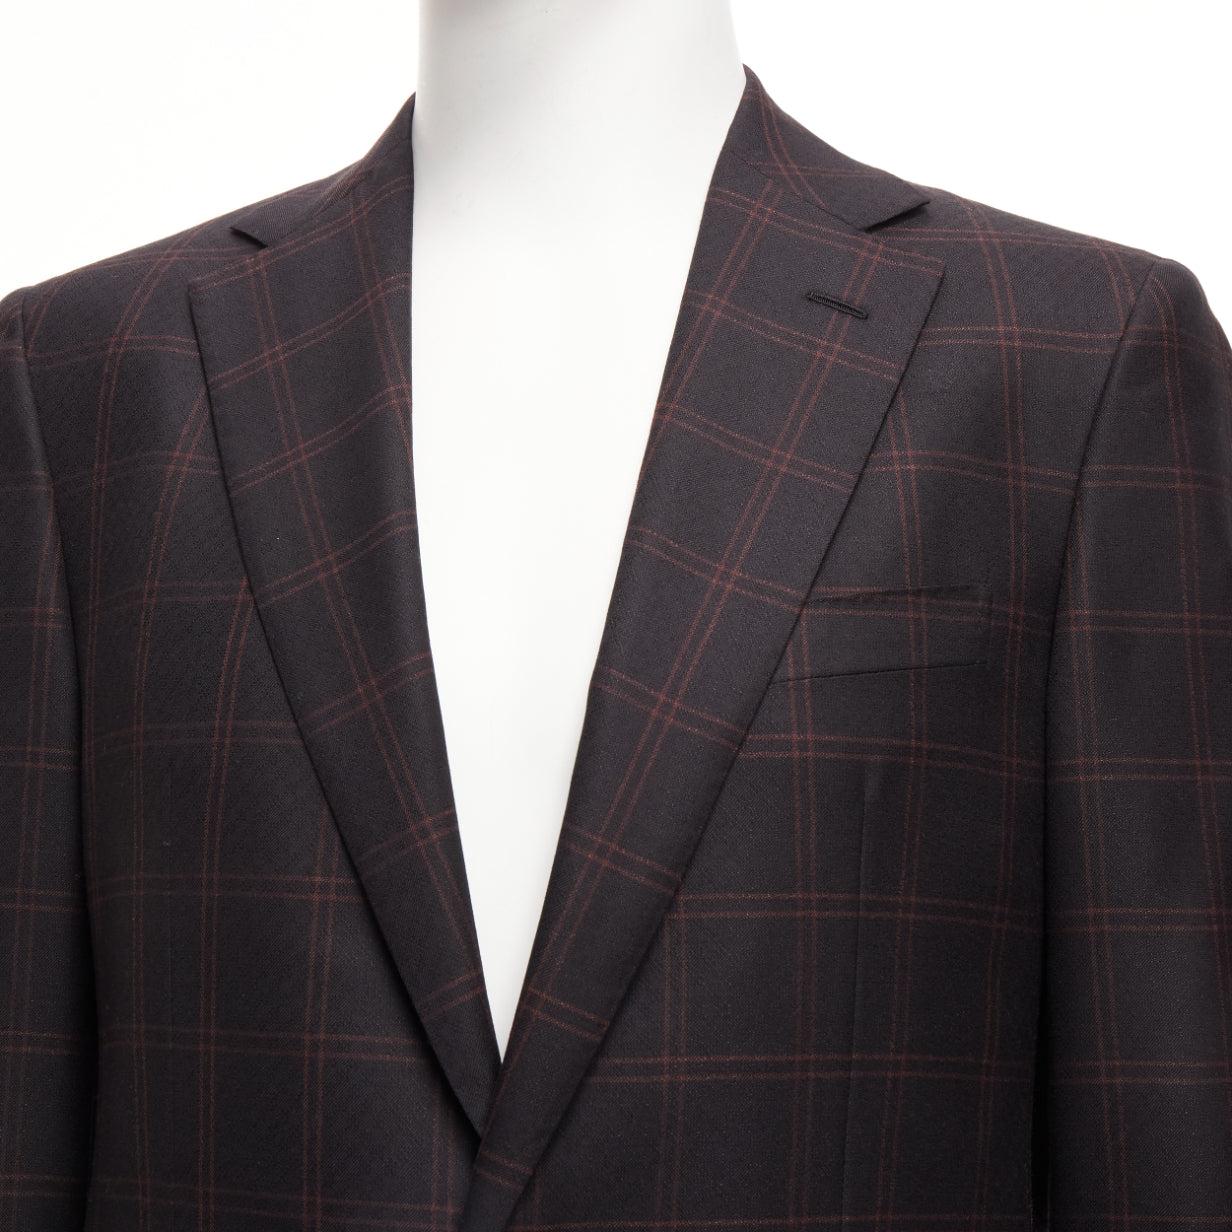 STEFANO RICCI black burgundy checkered wool cashmere blazer jacket IT48 M
Reference: JSLE/A00106
Brand: Stefano Ricci
Material: Wool, Cashmere
Color: Black, Burgundy
Pattern: Checkered
Closure: Button
Lining: Burgundy Fabric
Made in: